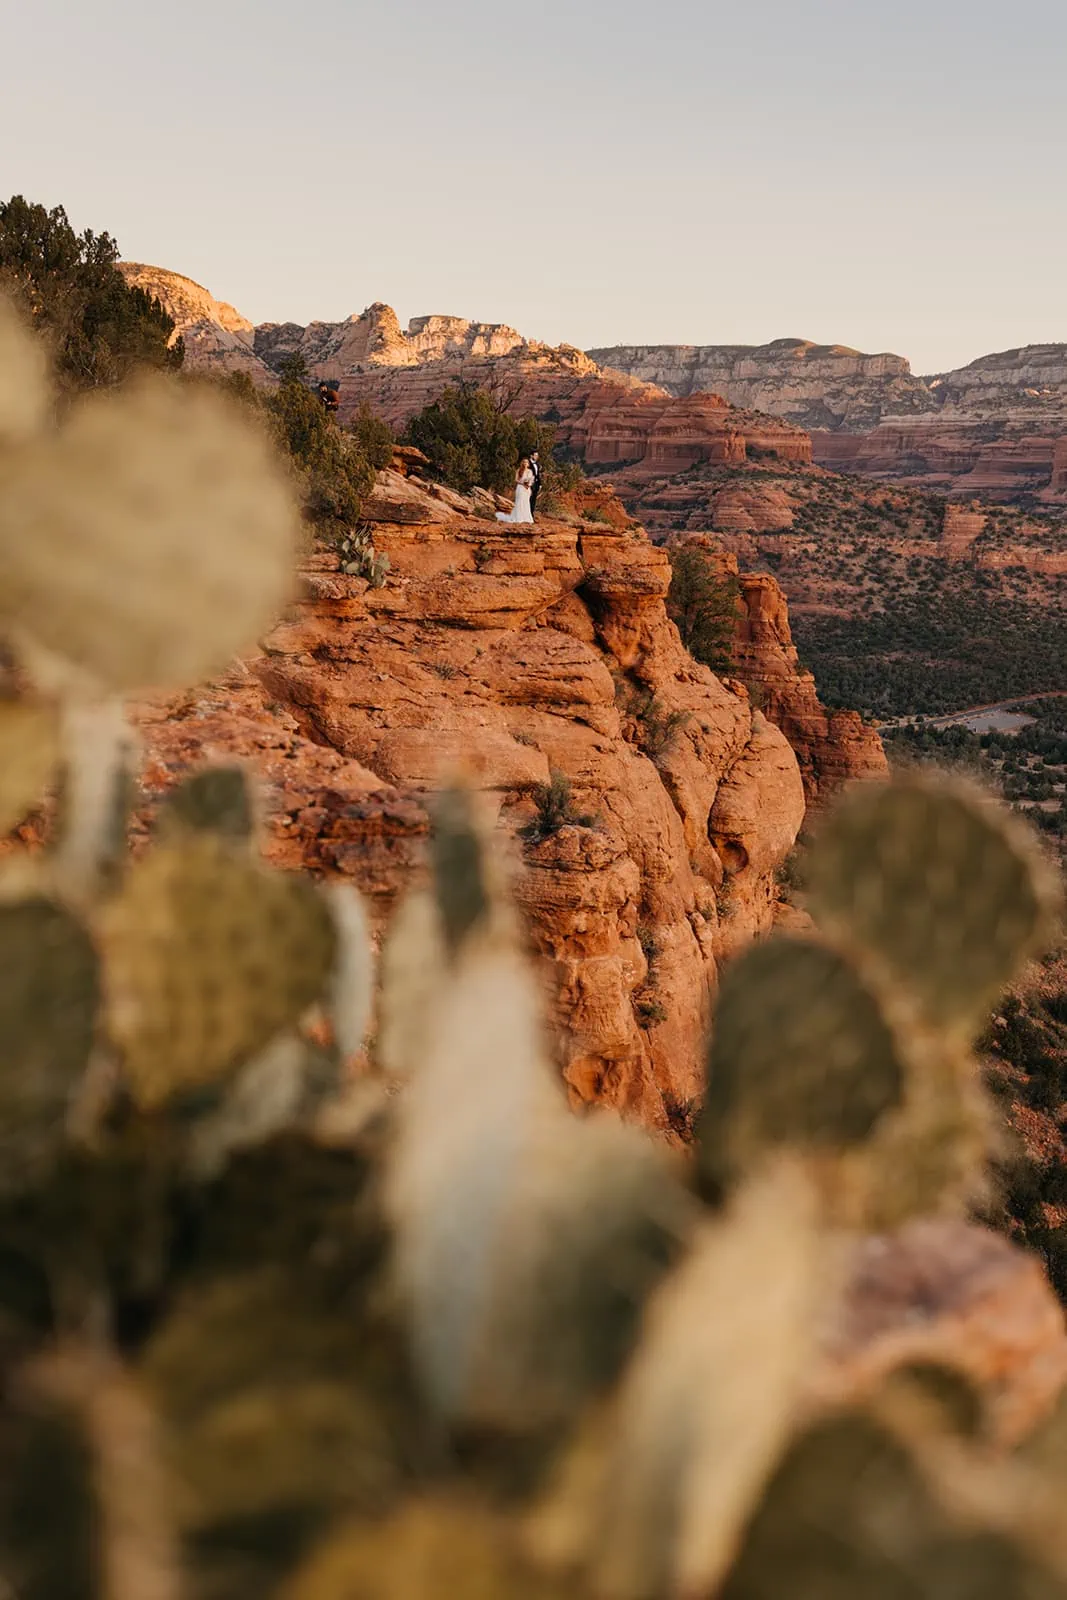 A bride and groom watches as the sun starts to rise over red rock cliffs.